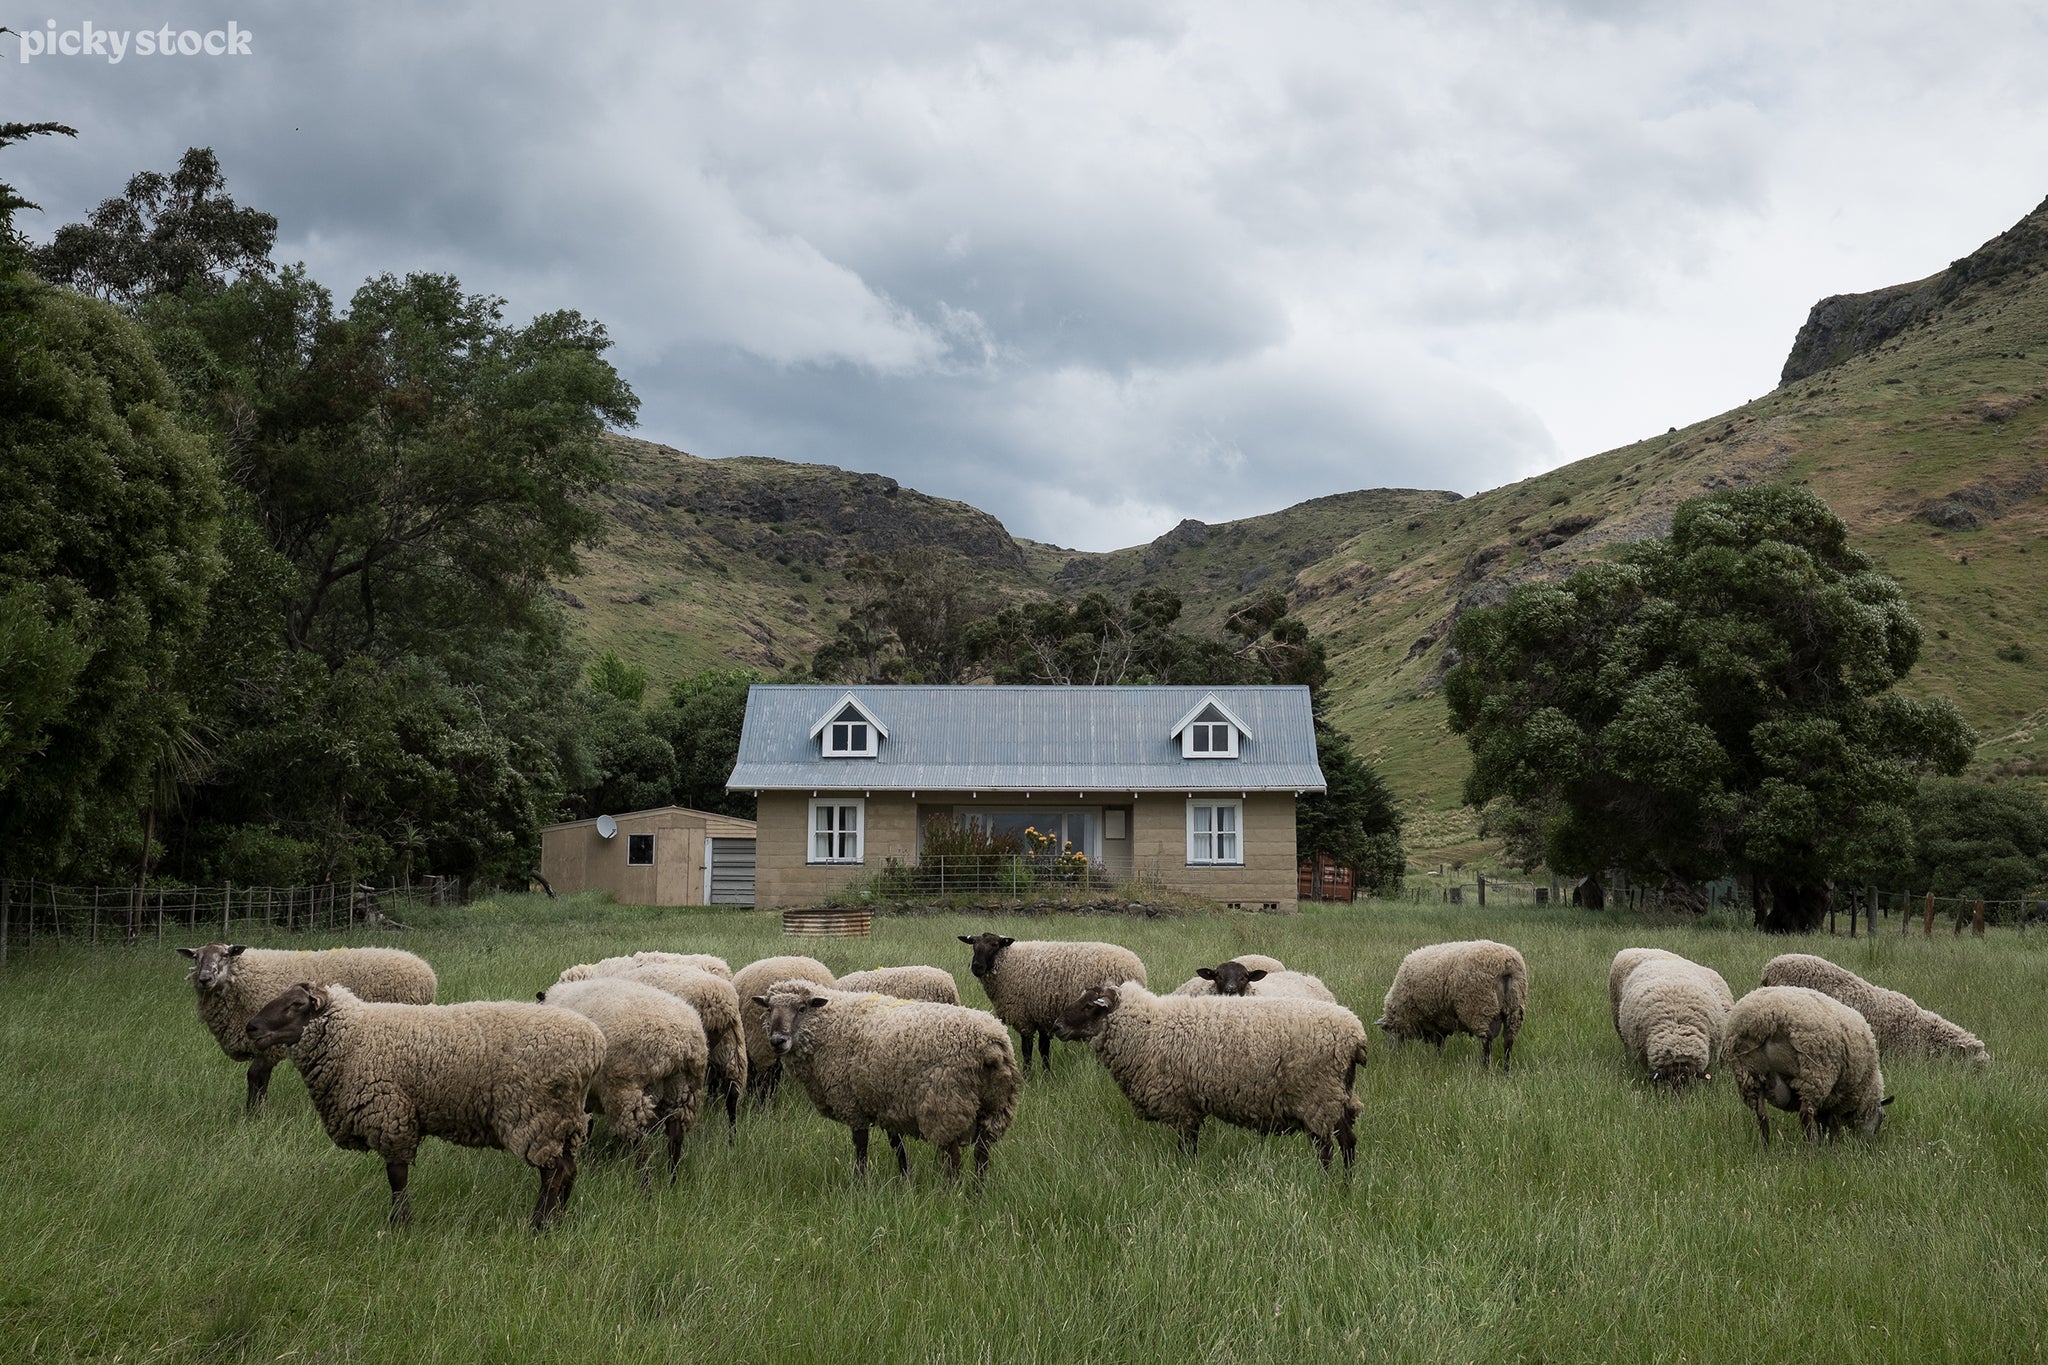 The landscape shows a flock of fifteen Suffolk sheep grazing on a lawn. Behind them is a small rural farmhouse and shed with white windows and an iron roof. The farm is bored within a valley of green hills and rocks, evergreens encroach on the house.